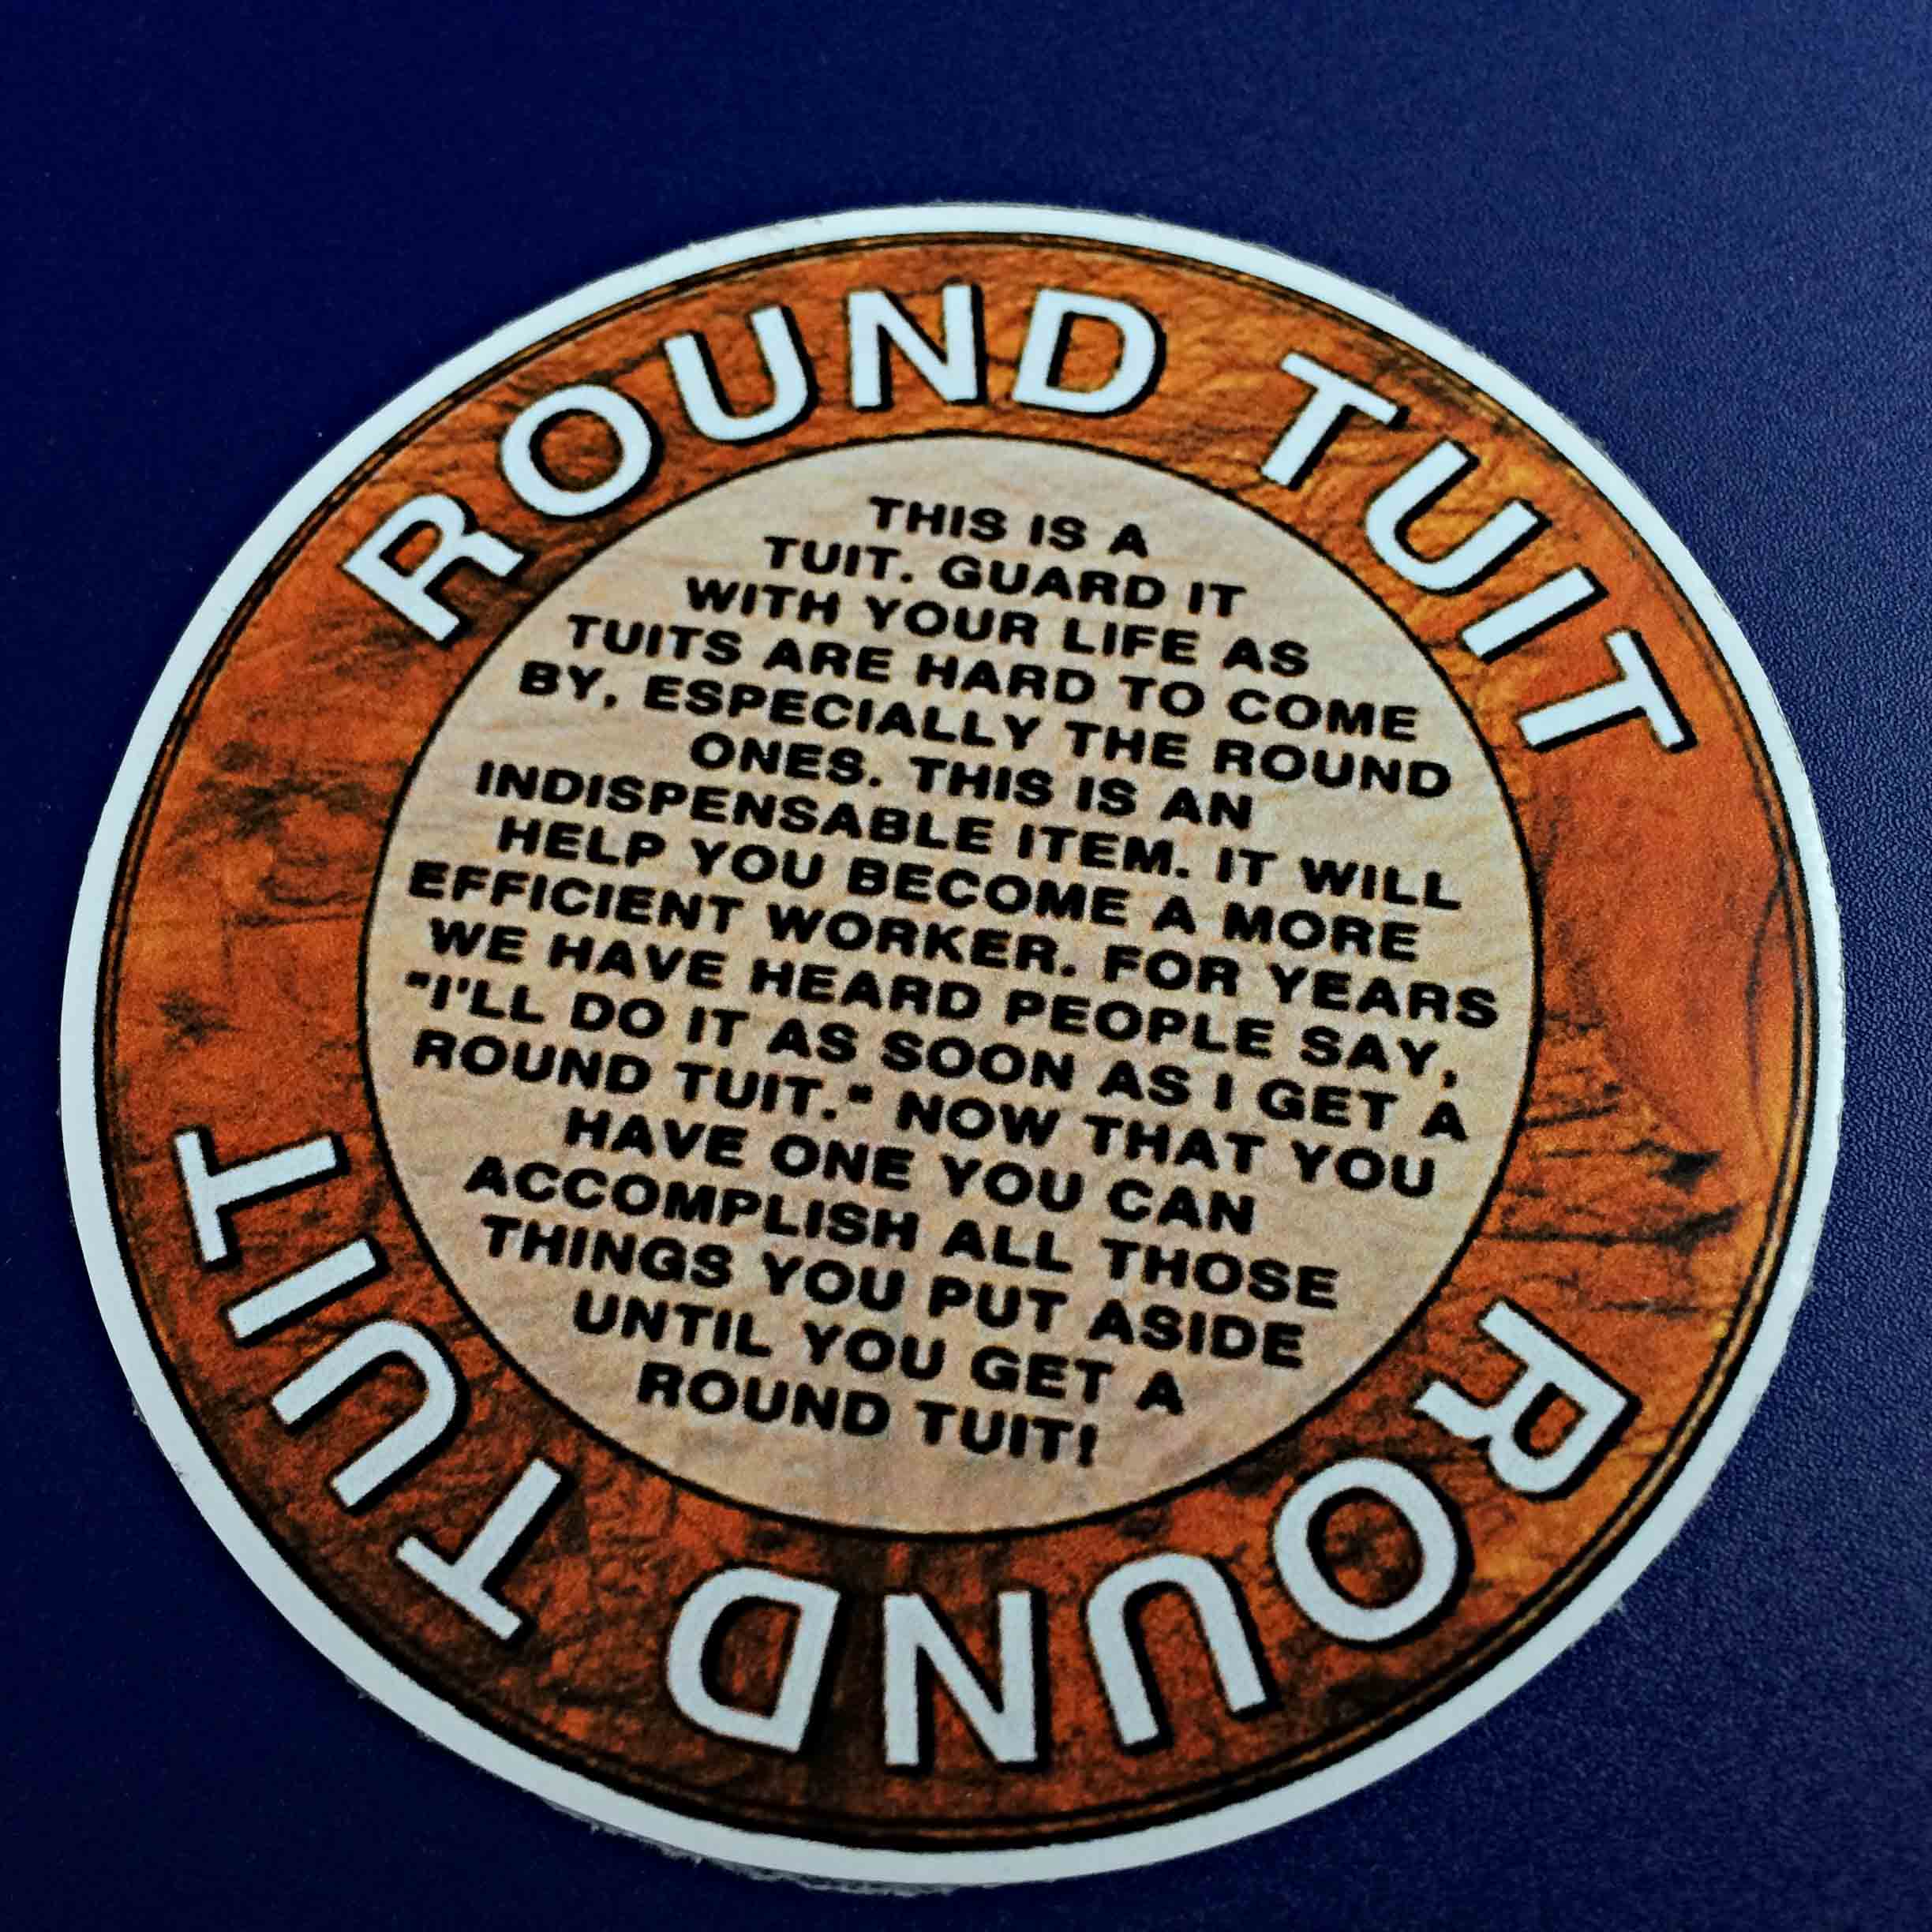 Round Tuit in white lettering on a brown outer circle. The inner circle contains the Round Tuit poem in black lettering.